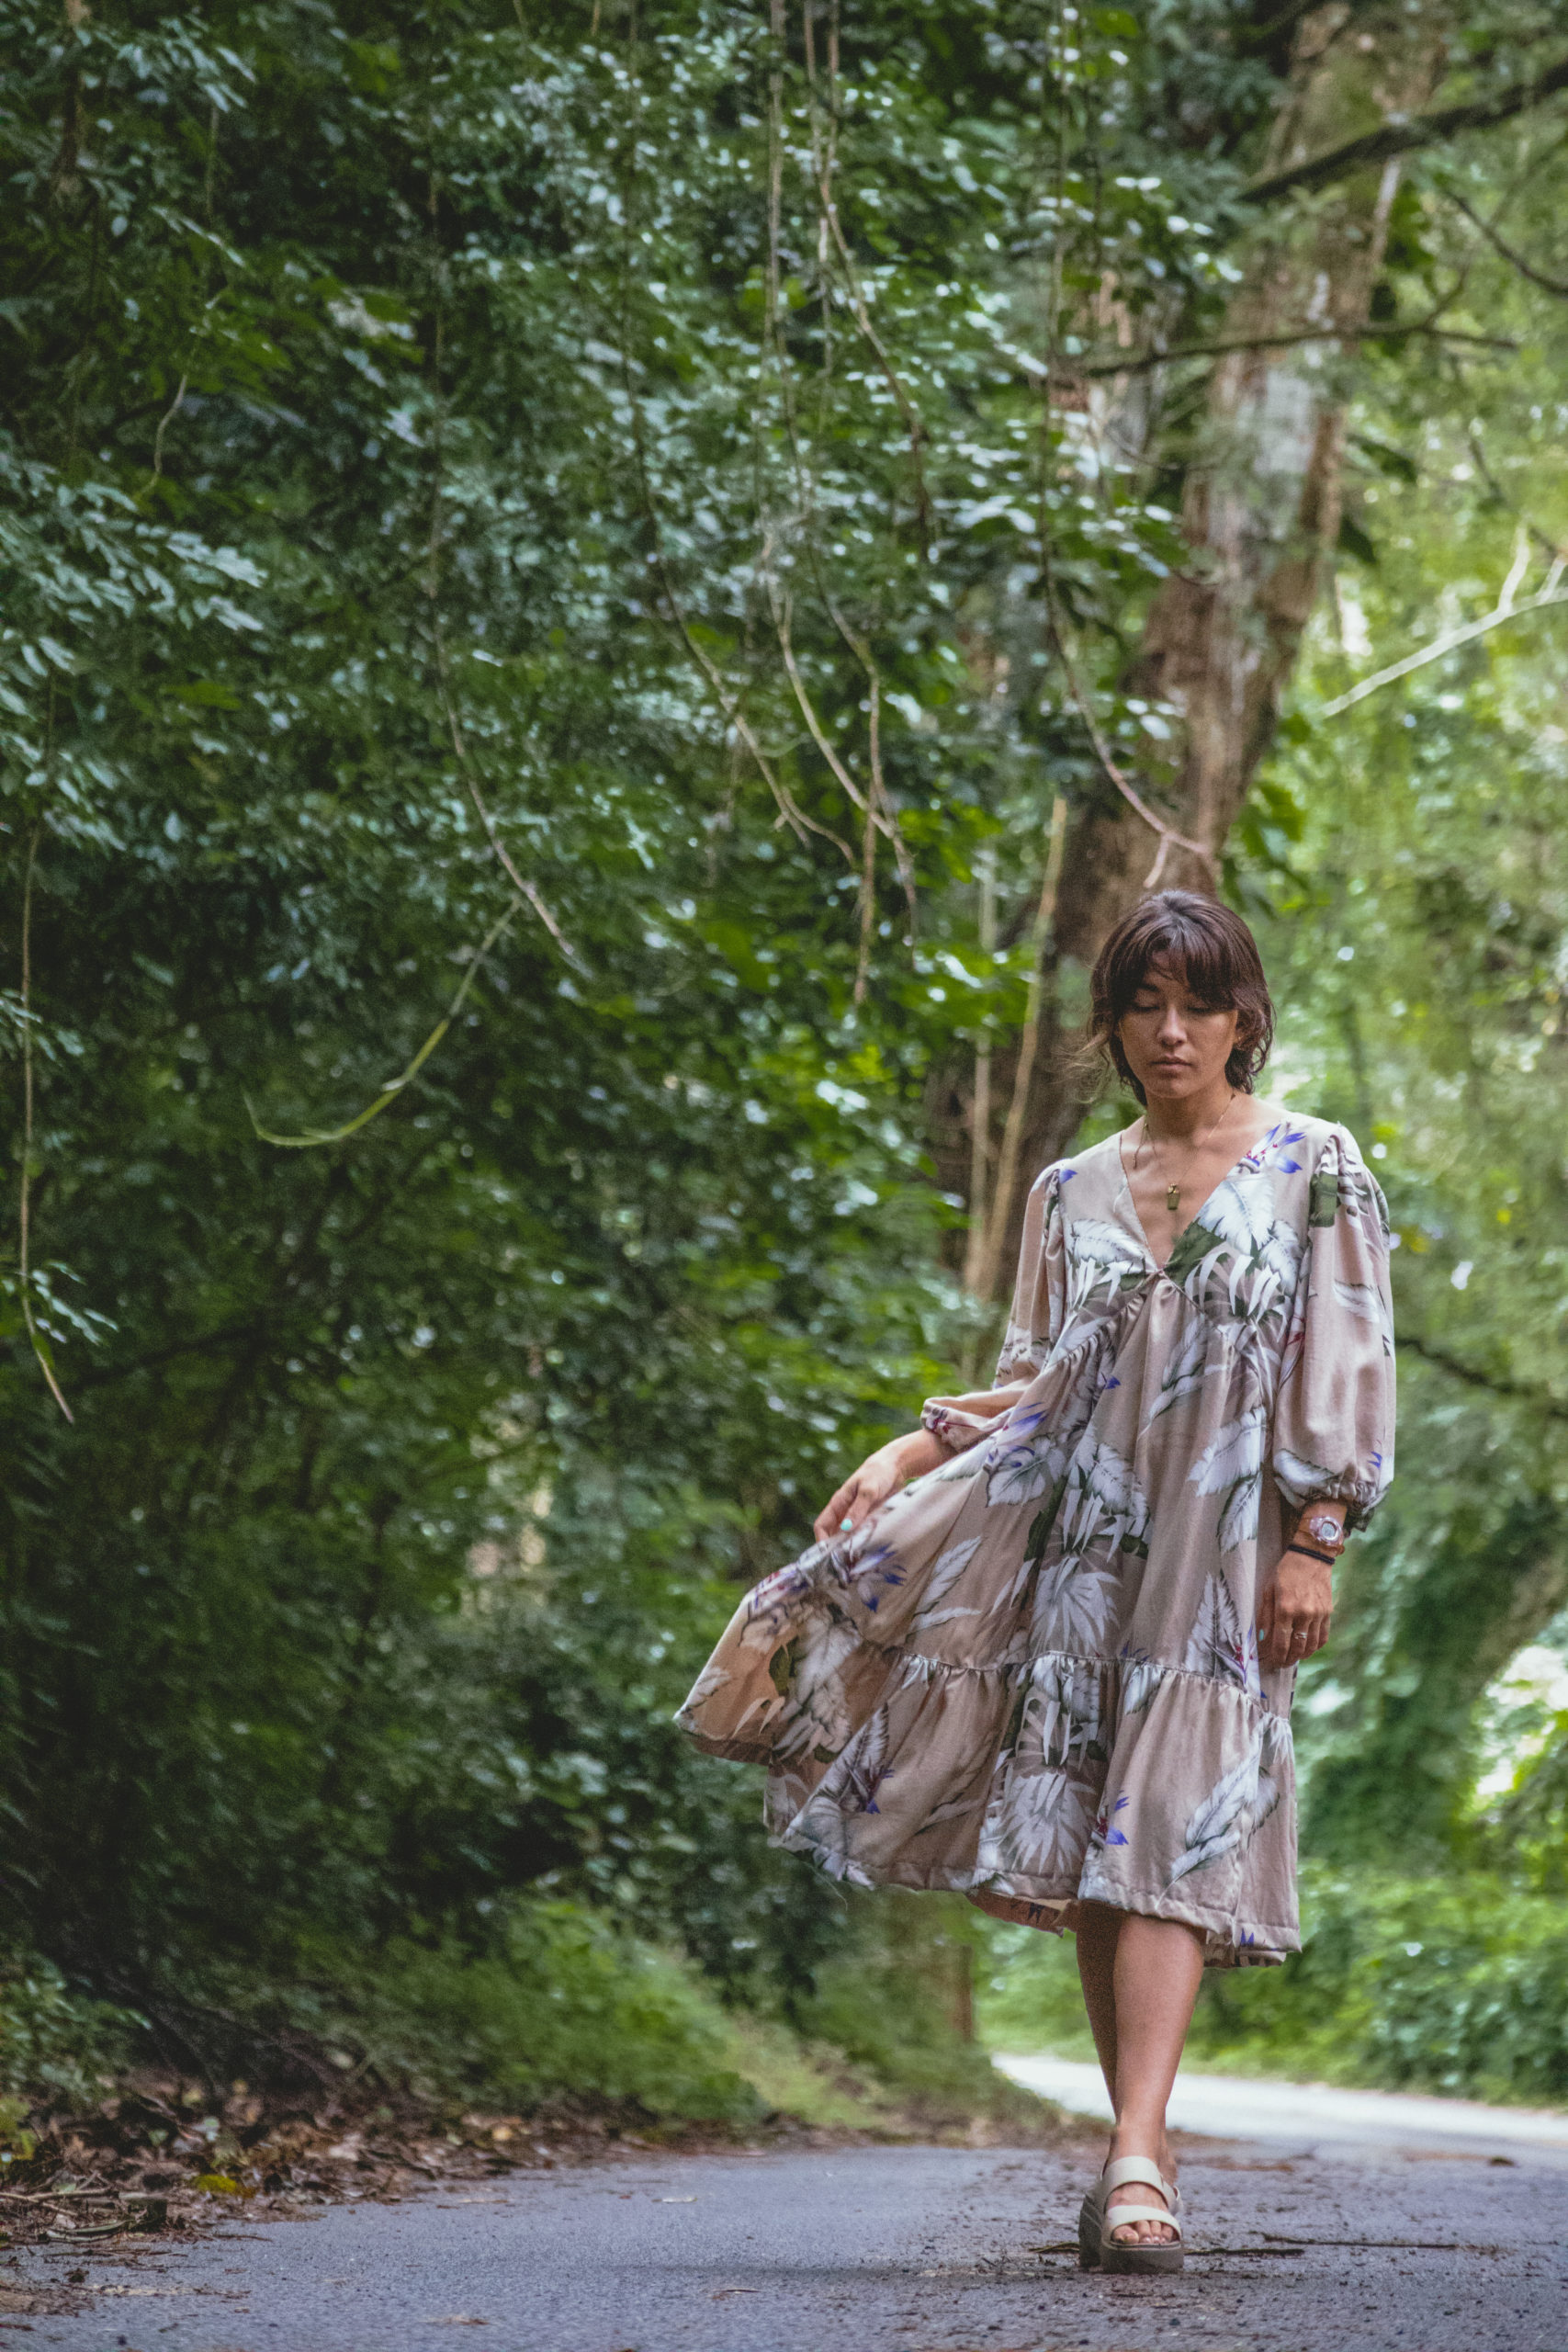 Woman in a beige tropical patterned dress walks on a forested road